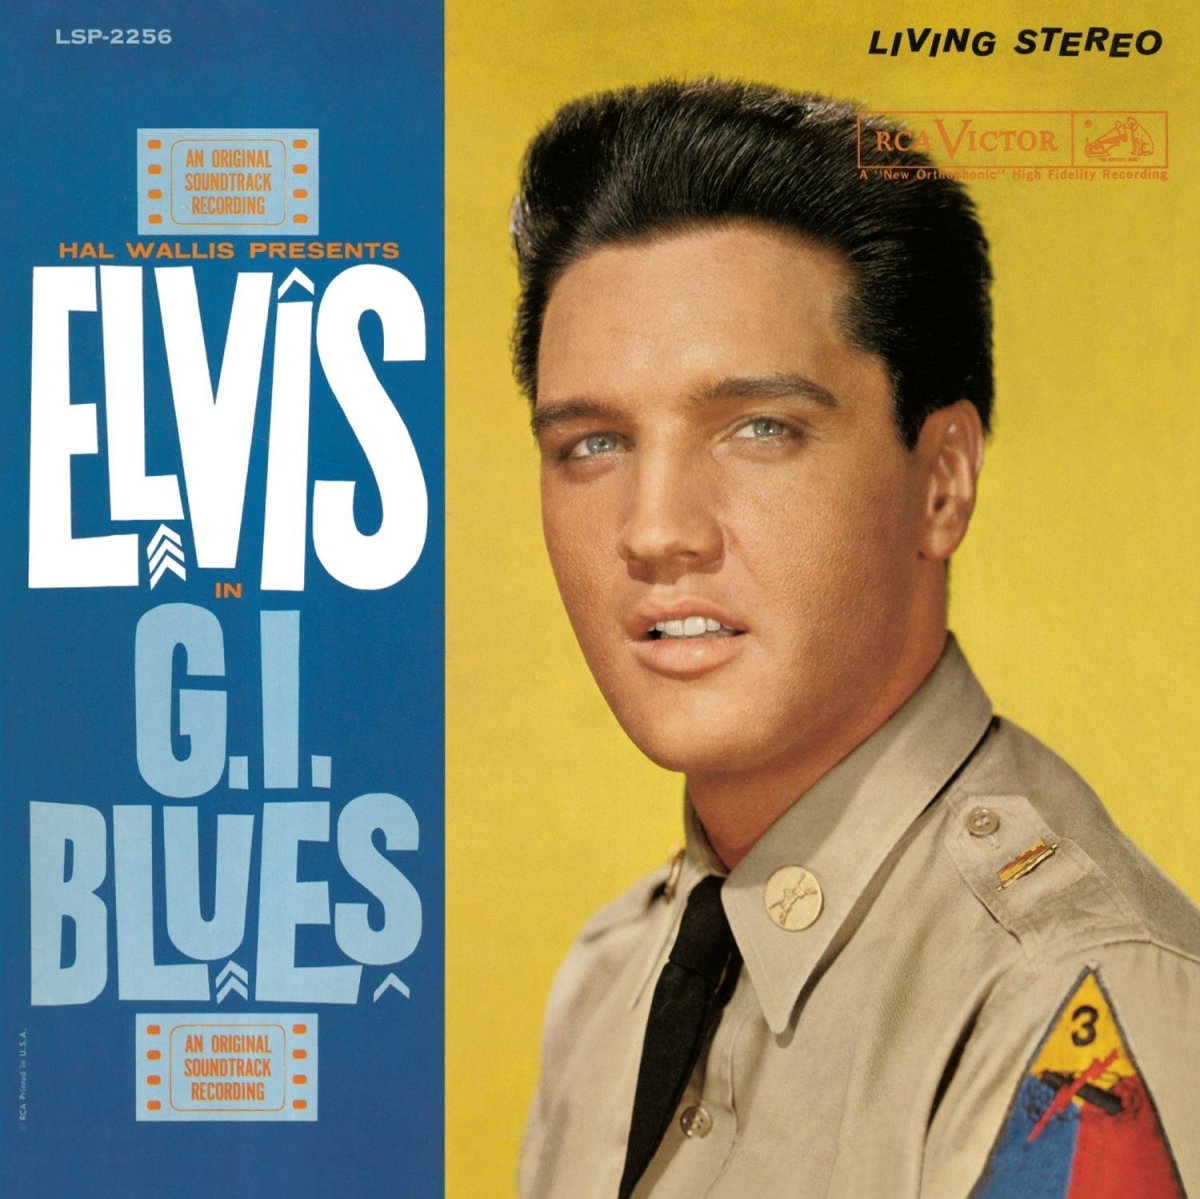 Elvis Presley - Cover to G.I. Blues